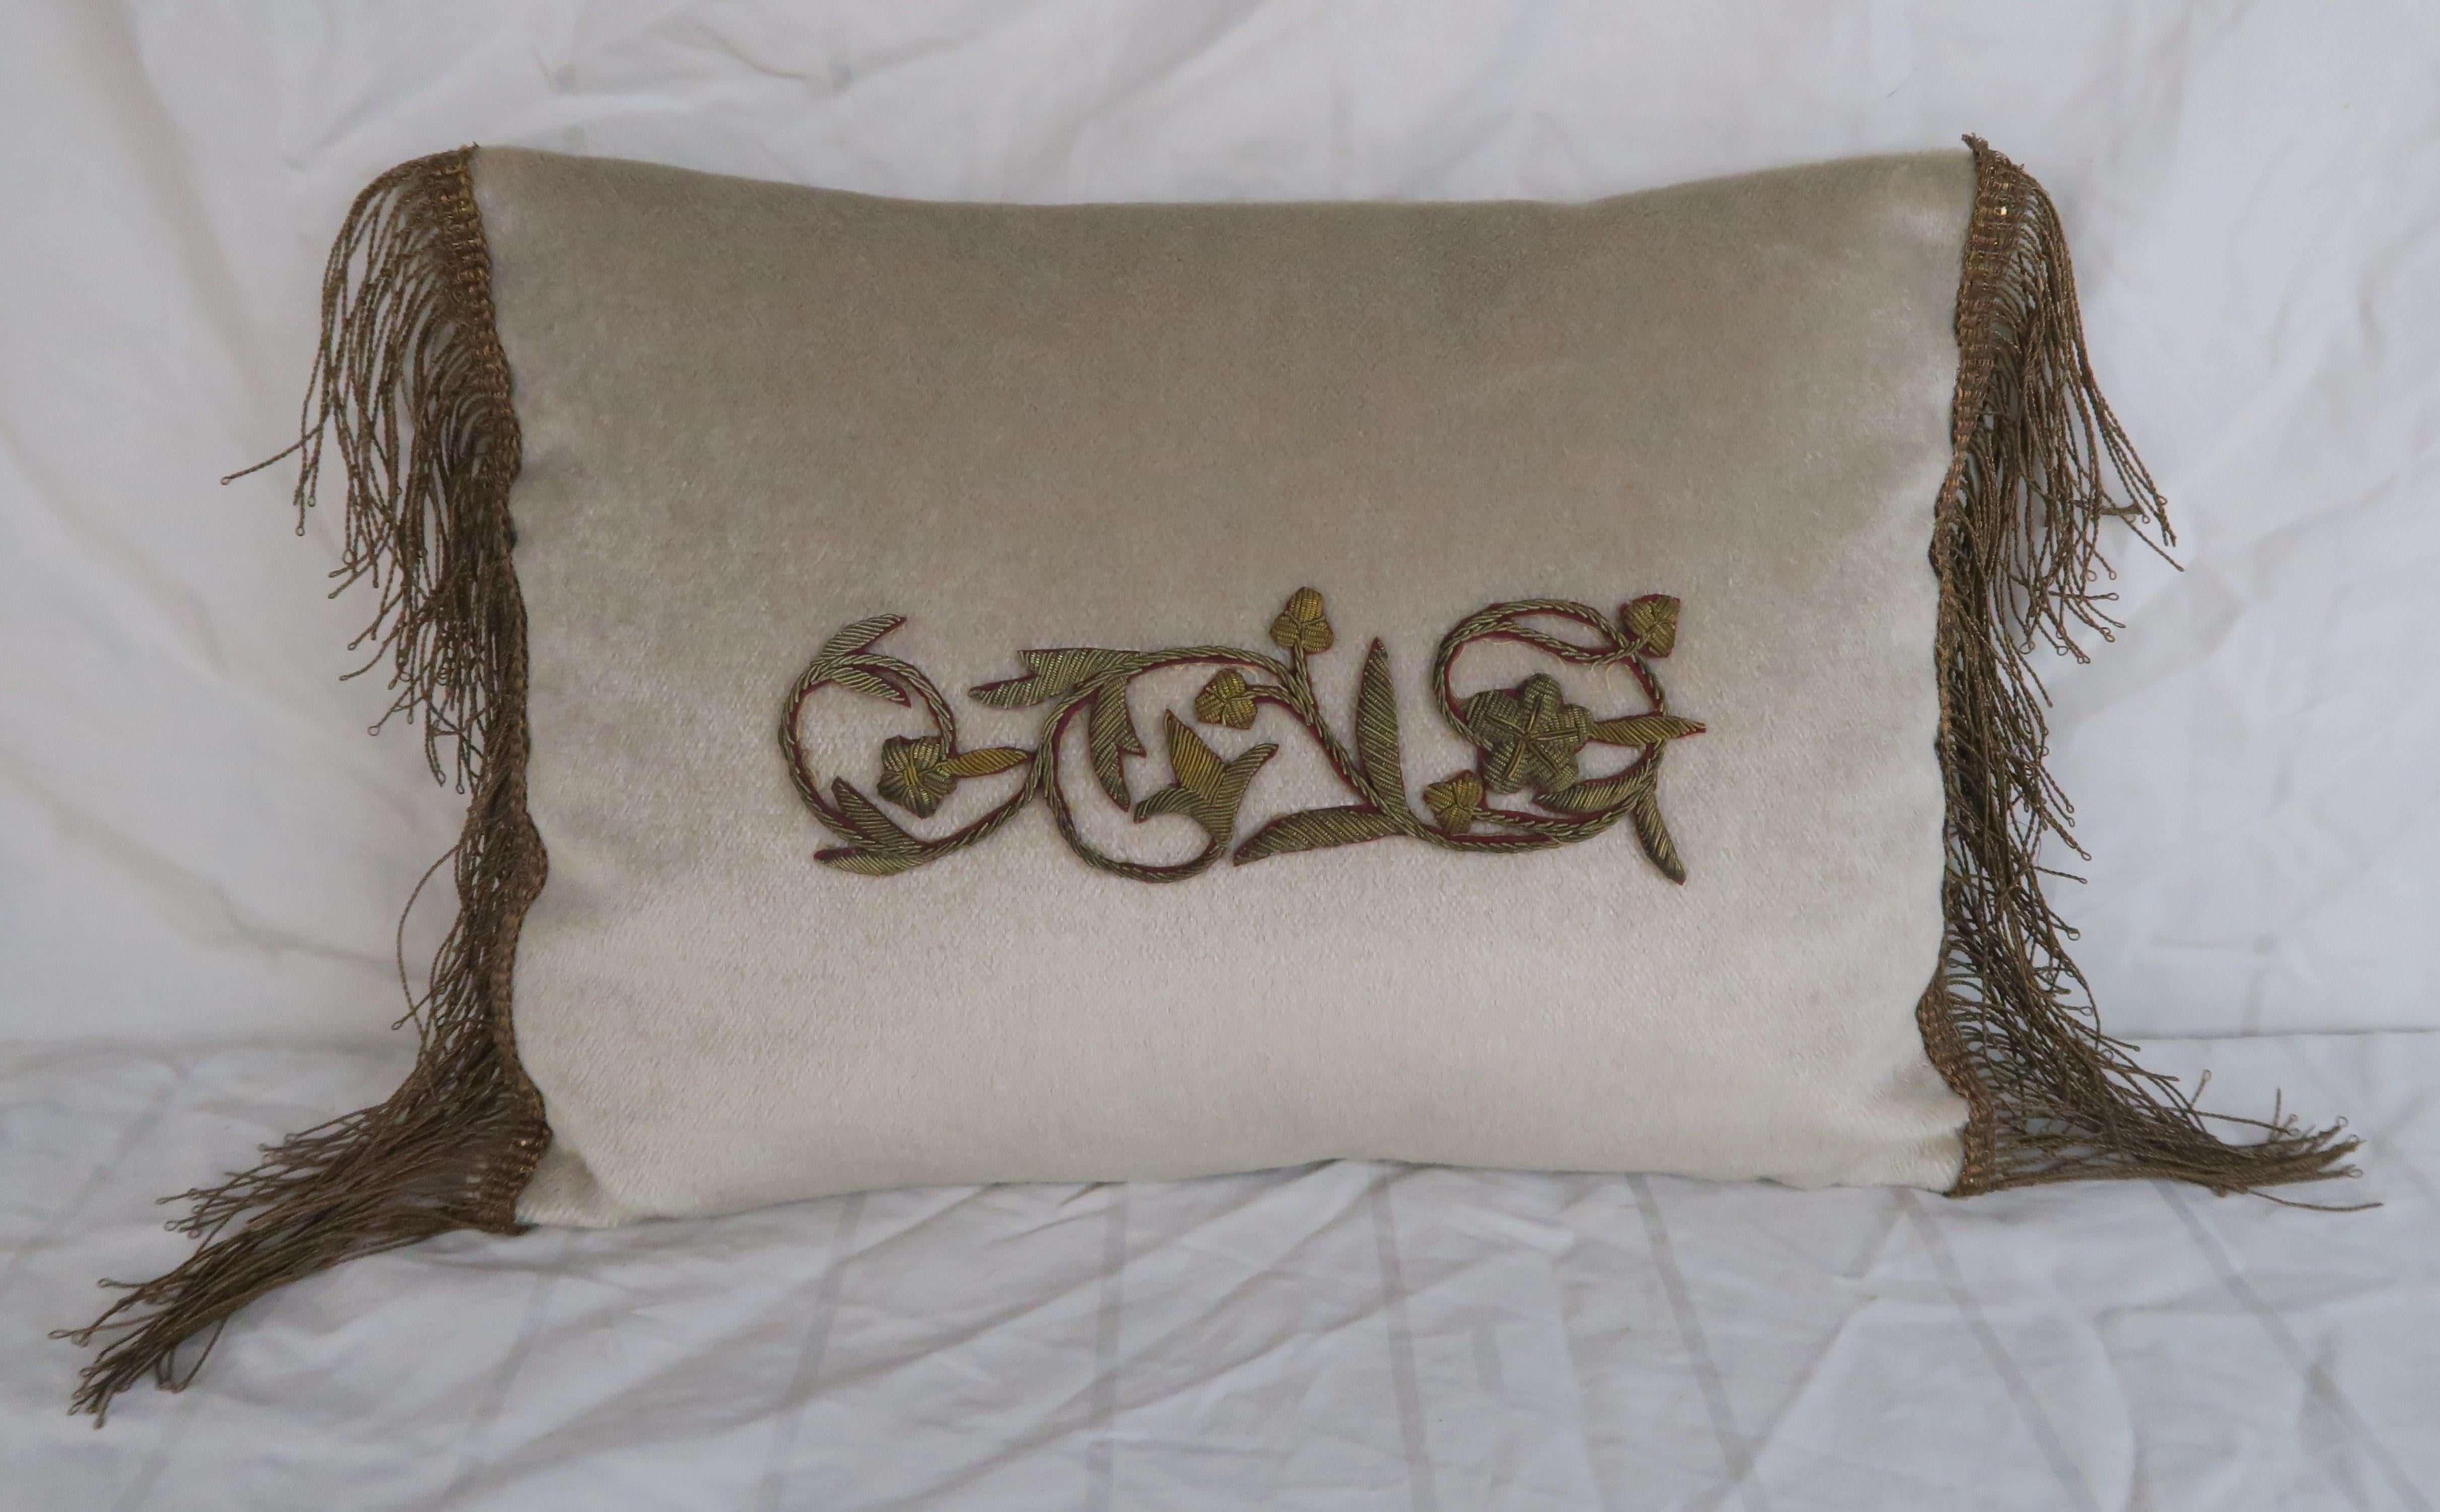 Rococo Pair of Pillows with Metallic Appliques and Trim